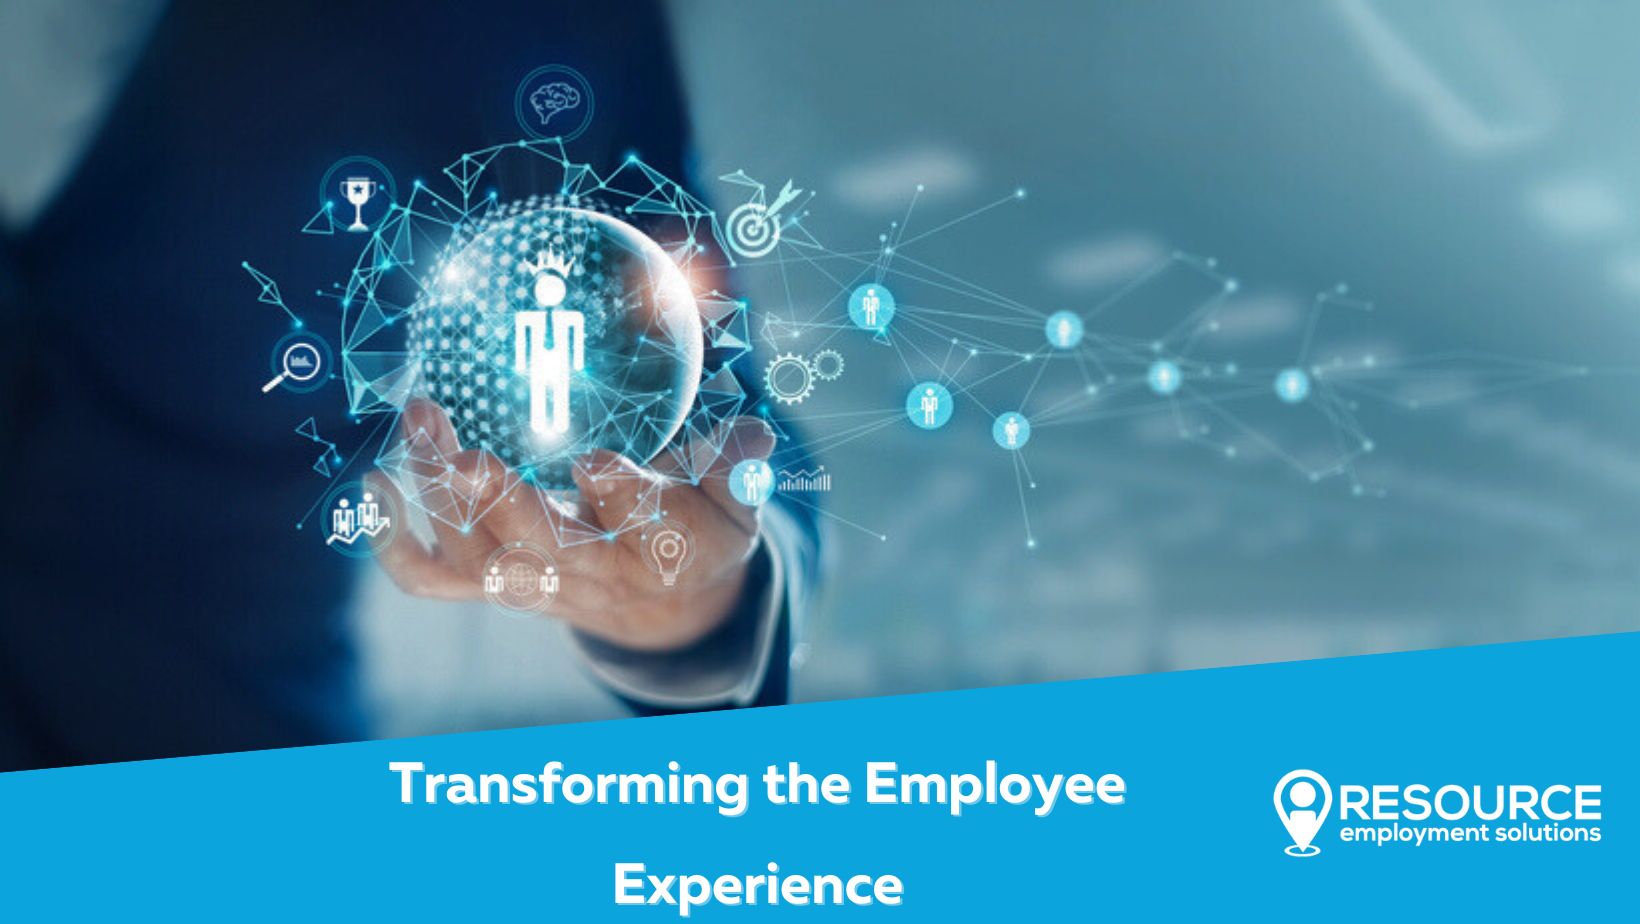 Transforming the Employee Experience: The Power of AI Chatbots